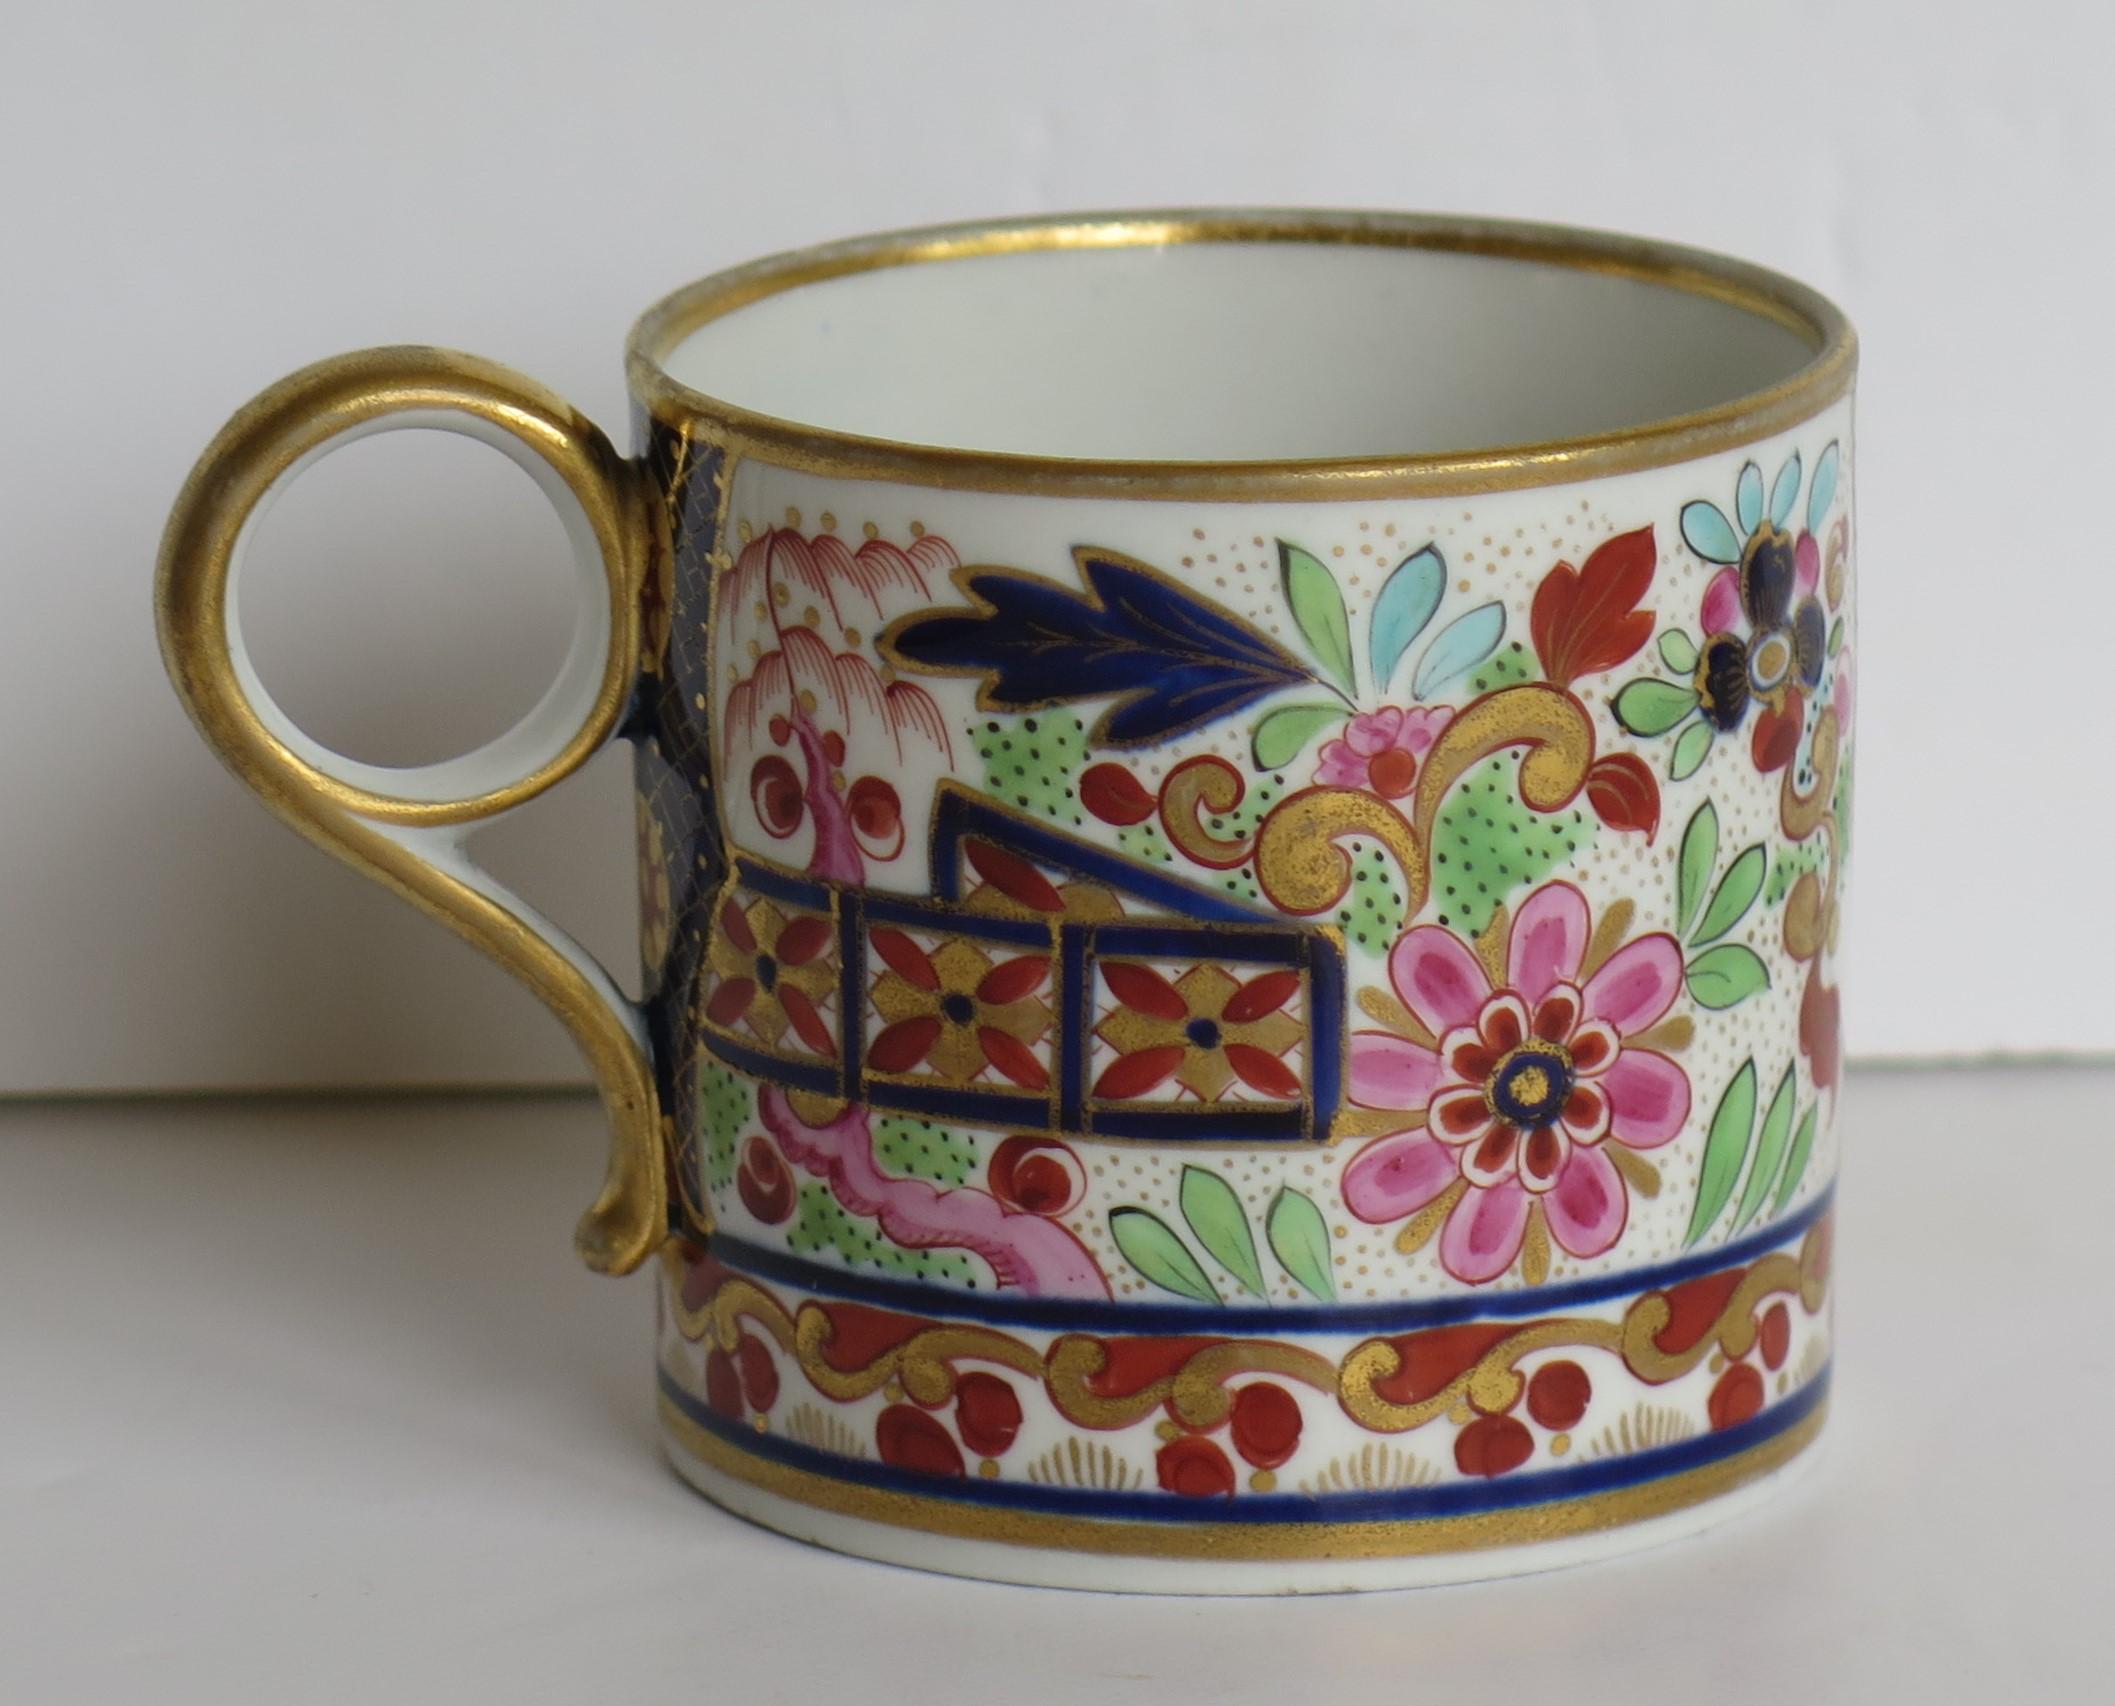 This is a high quality coffee can in a hand gilded pattern made by Worcester during the Barr, Flight & Barr period (BFB) of George 111rd years, circa 1807-1813.

The coffee can is well potted and nominally parallel, with a ring handle. It has a